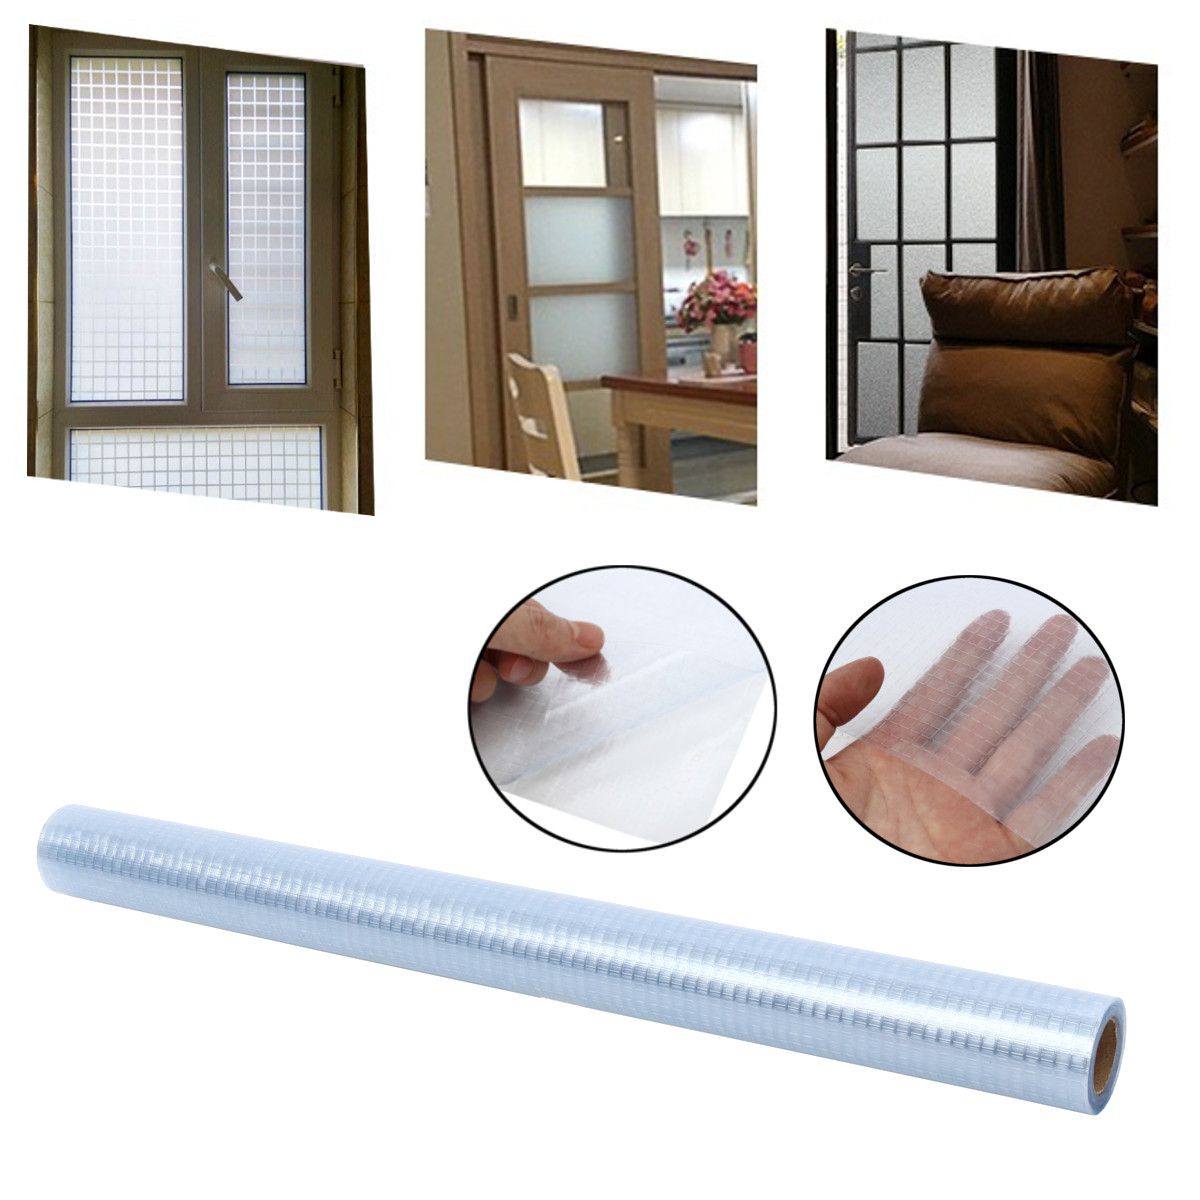 2m-Removable-Grid-Frosted-Frosting-Window-Door-Glass-Privacy-Film-Home-Decor-1588170